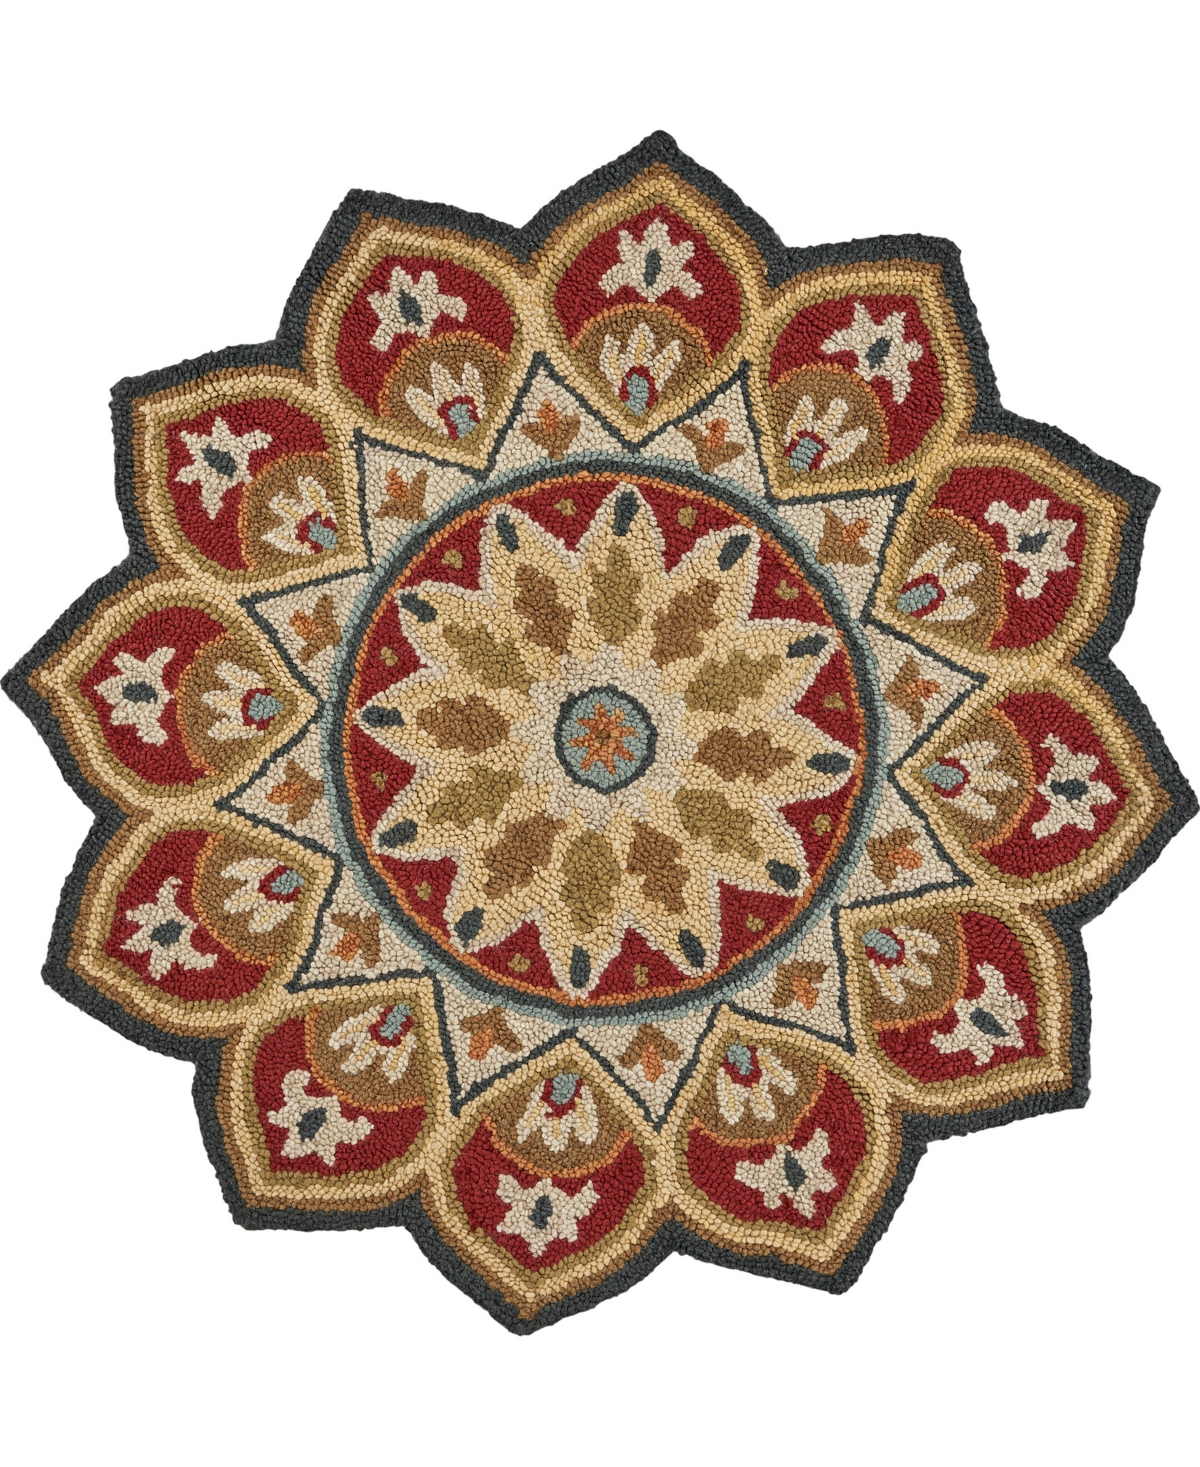 Lr Home Sweet Sinuo54103 4' X 4' Round Area Rug In Red